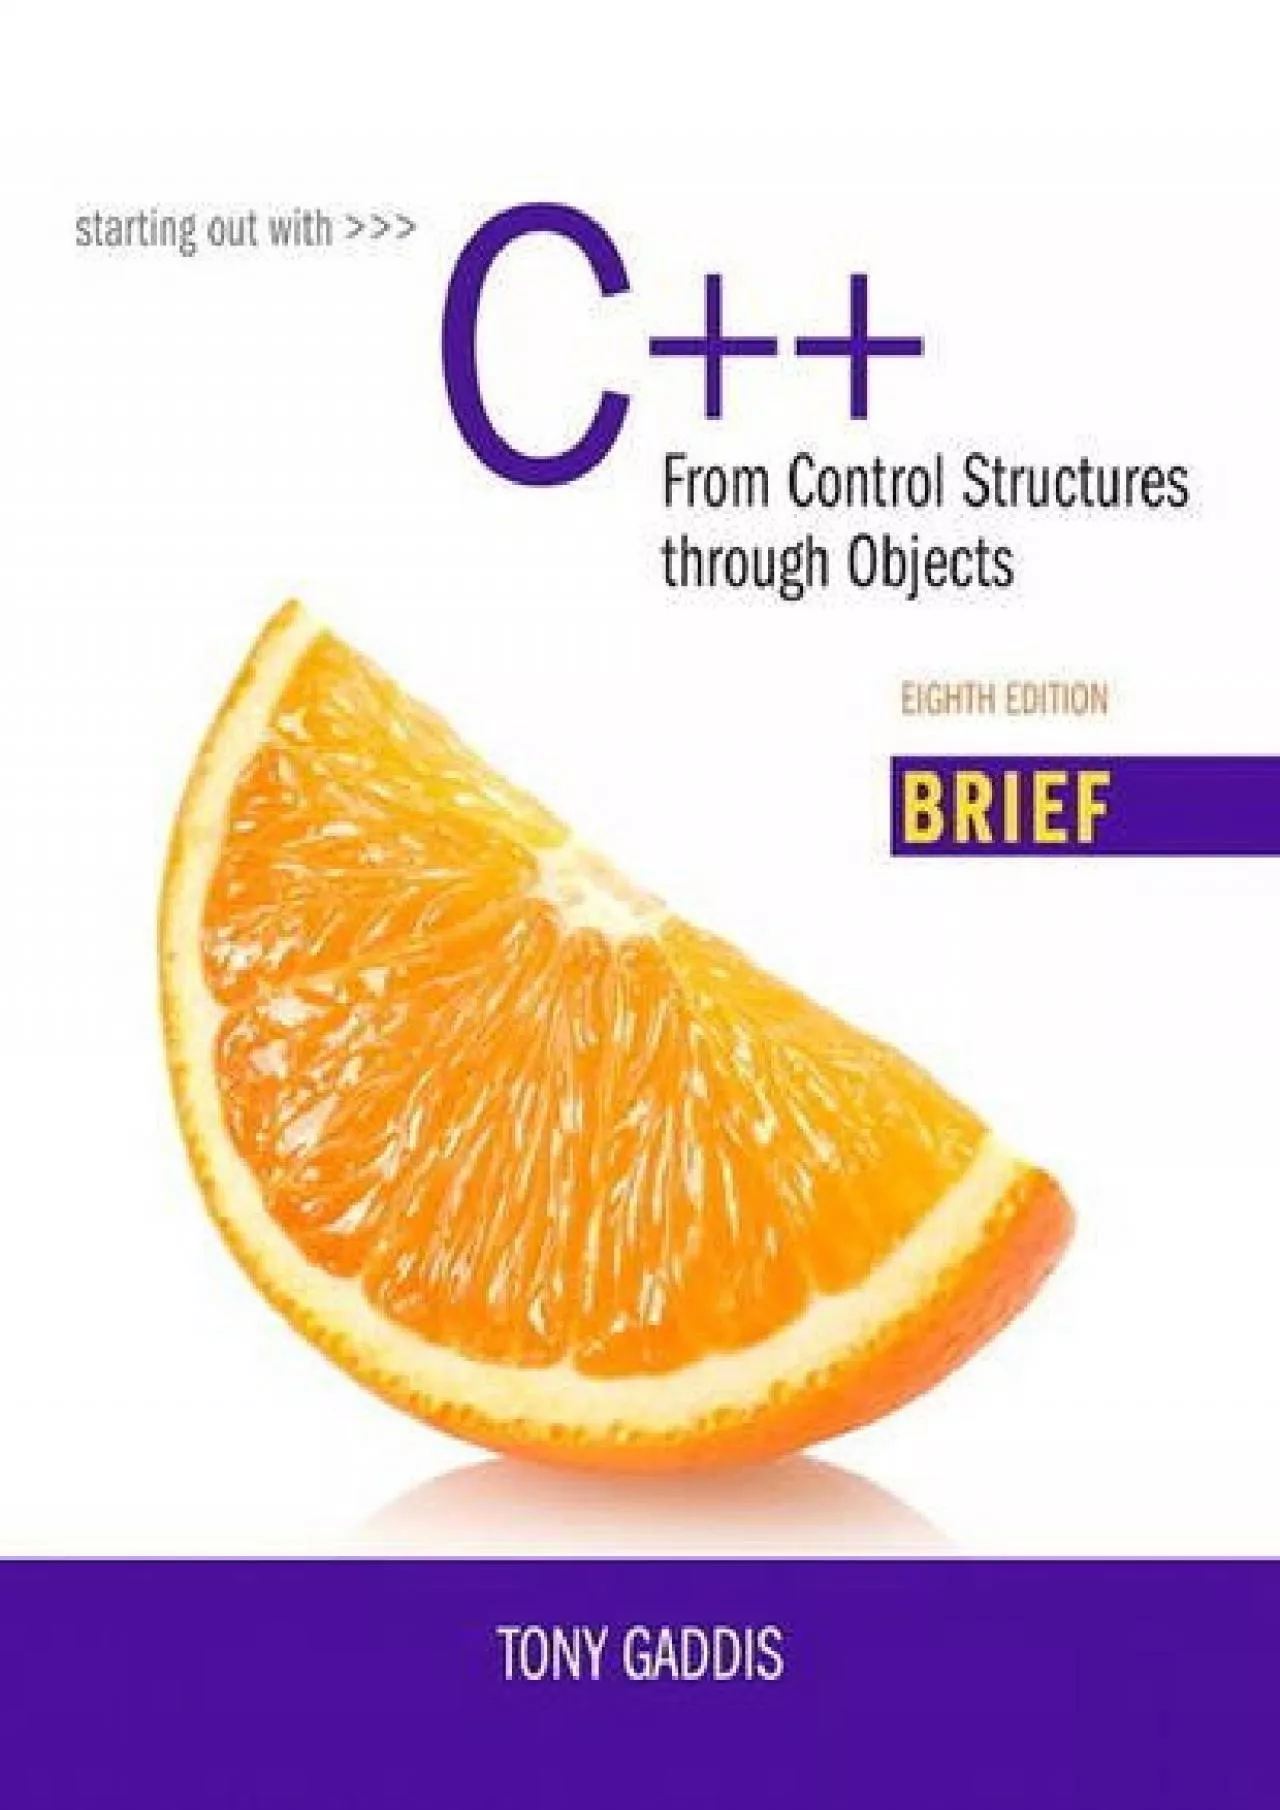 [READ]-Starting Out with C++: From Control Structures through Objects, Brief Version (8th